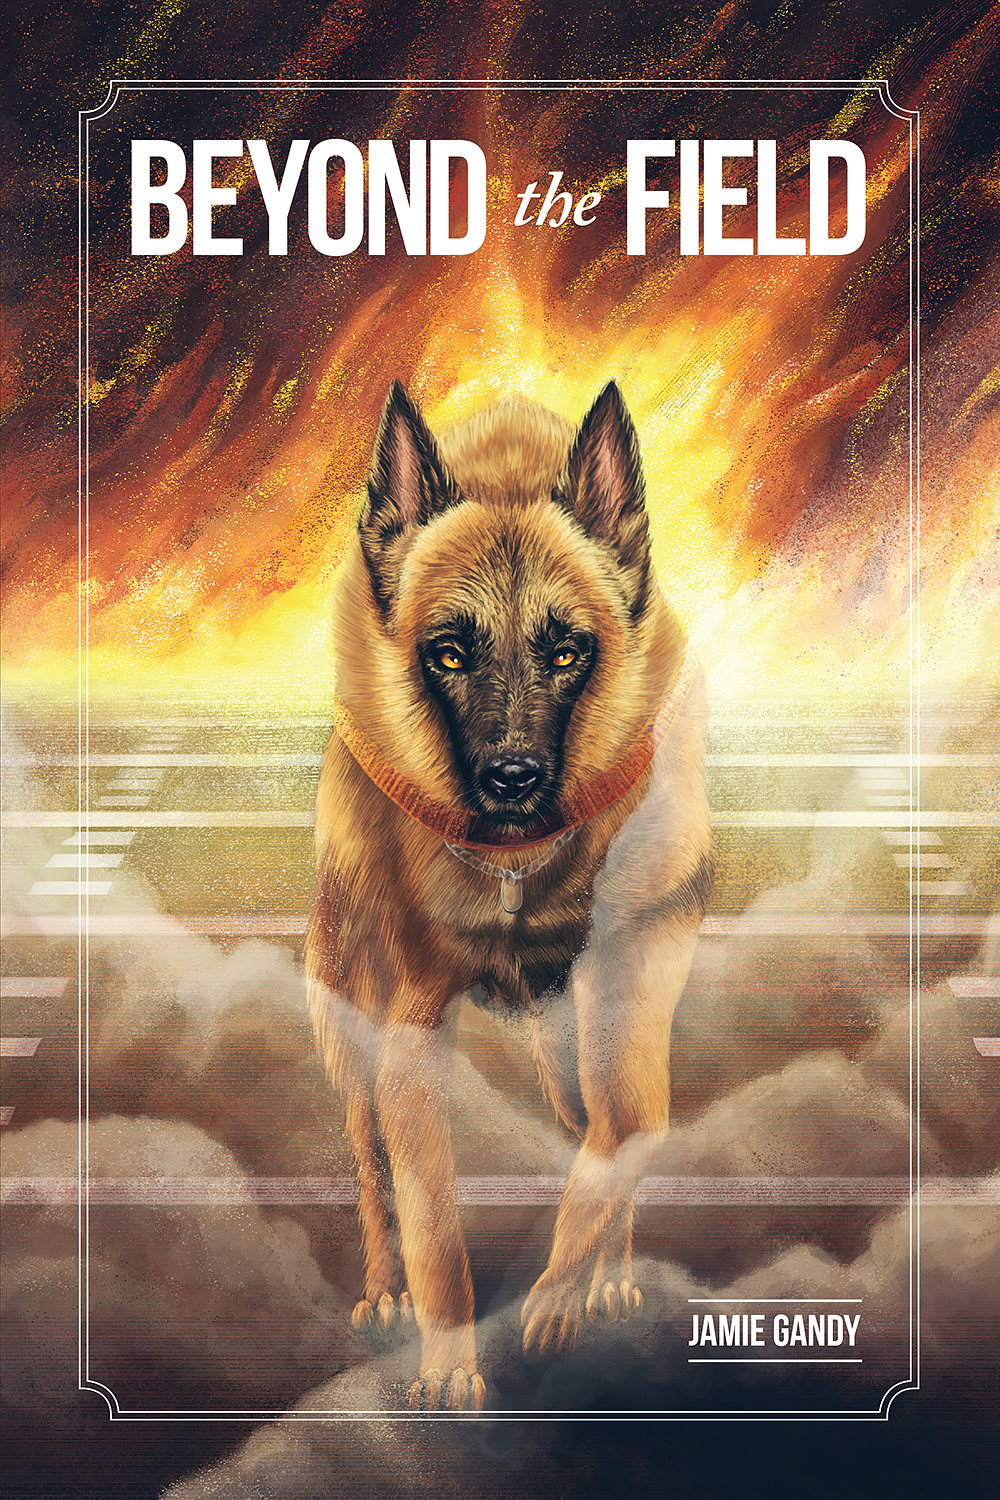 book cover book dog Belgian Malinois fire